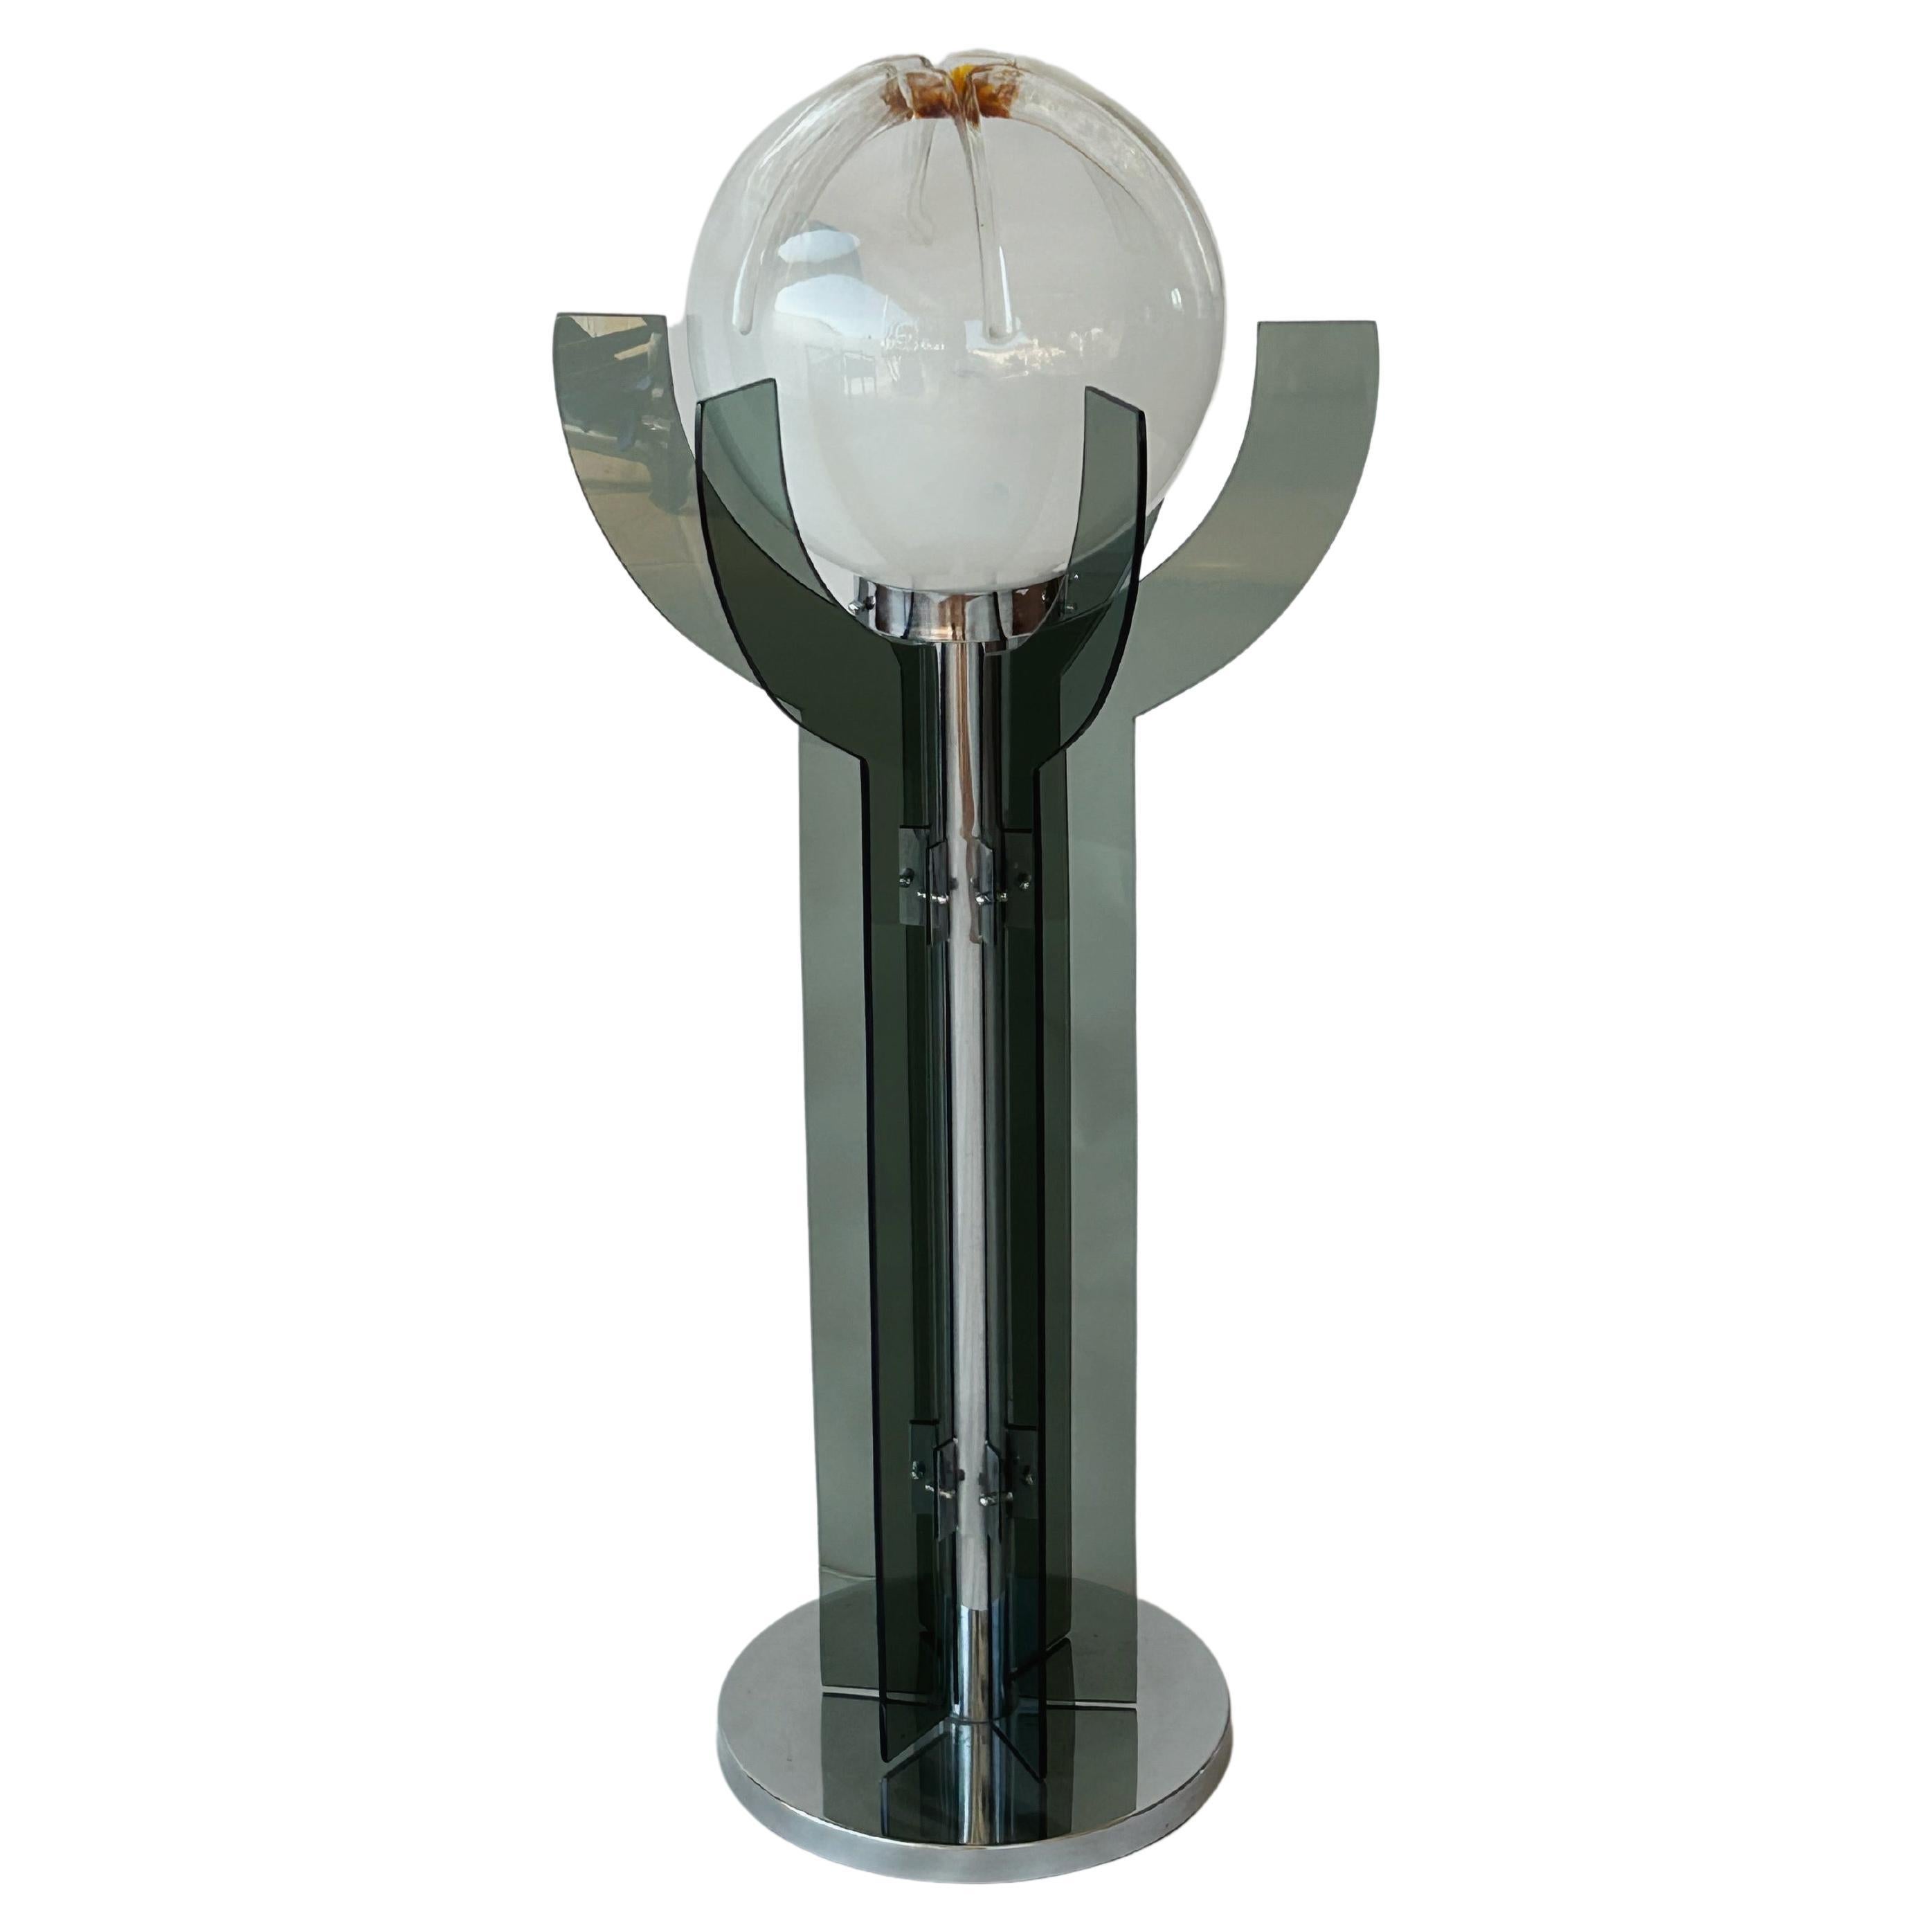 Murano Glass Floor Lamp in the style of Mazzega, 1970s